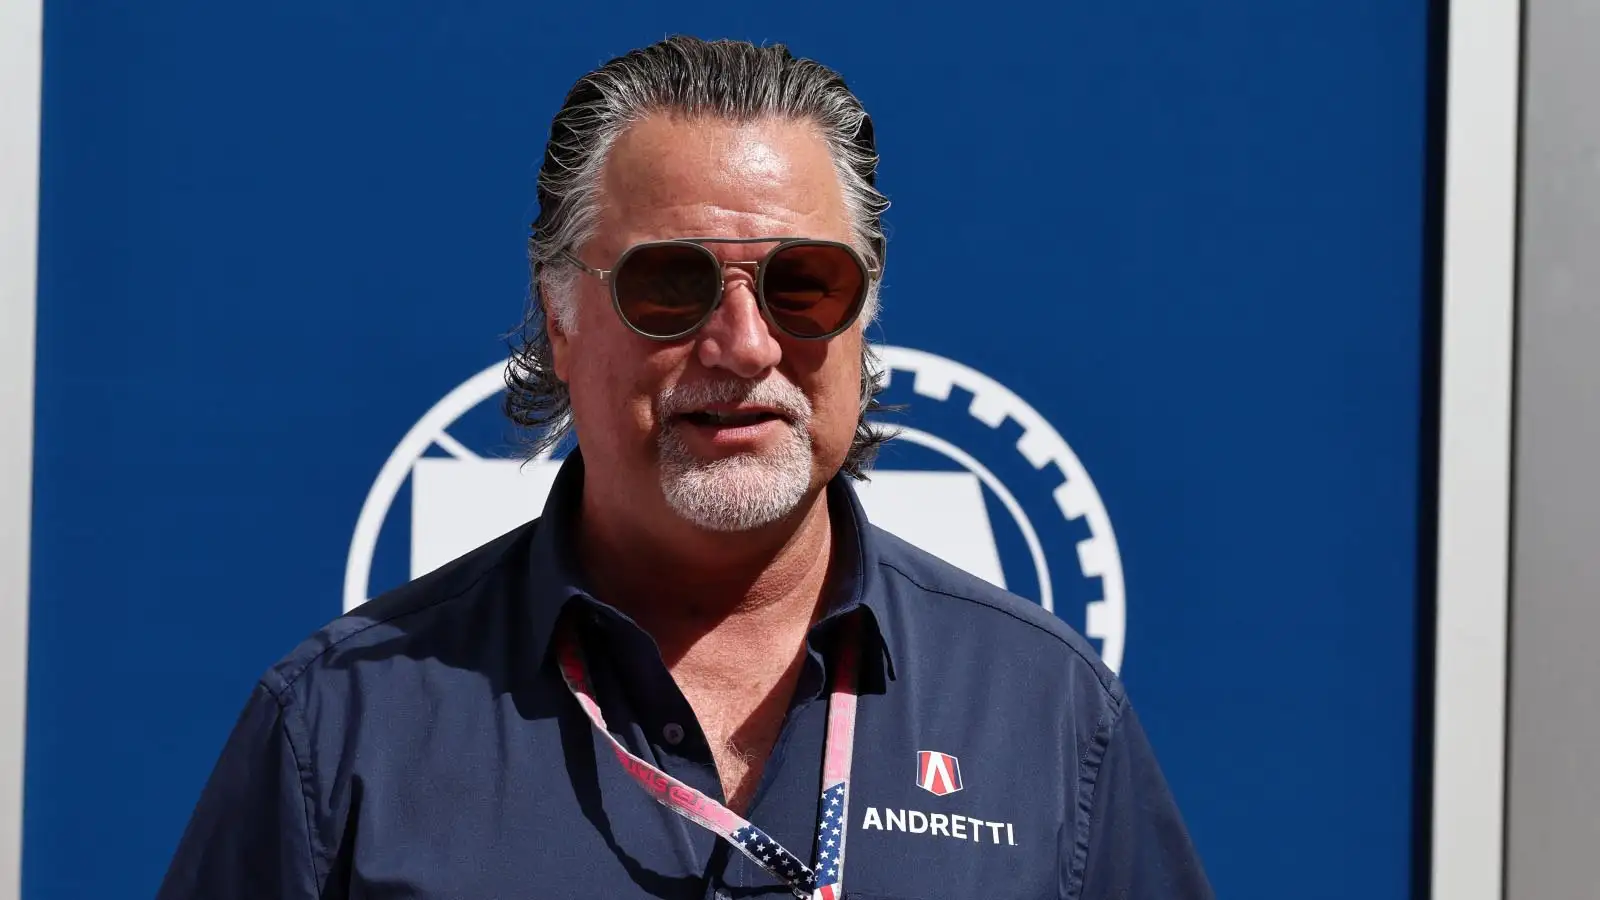 Michael Andretti was a recent F1 attendee in Austin.